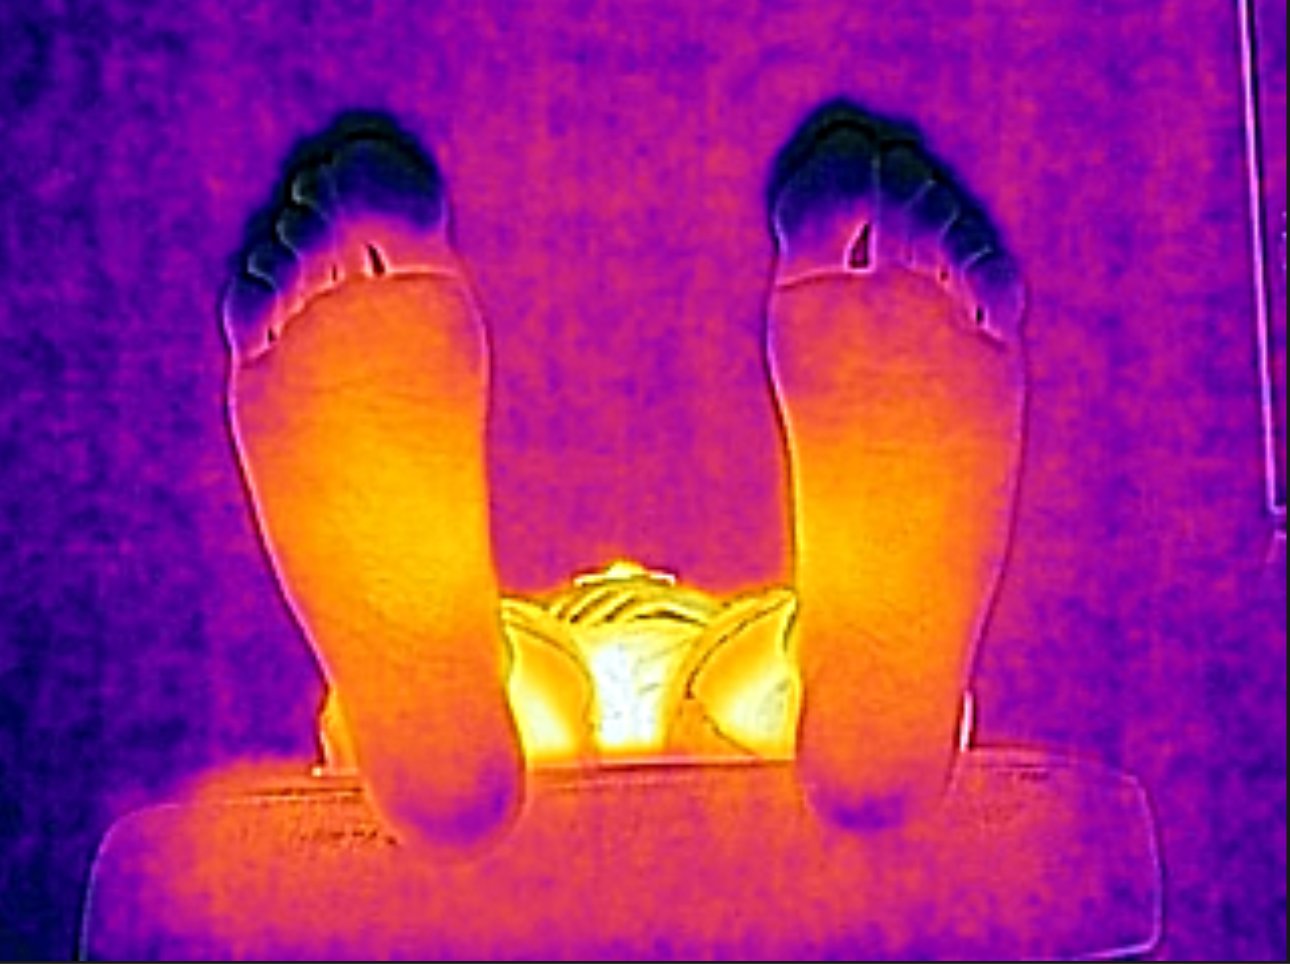 Feet thermal picture example 1.